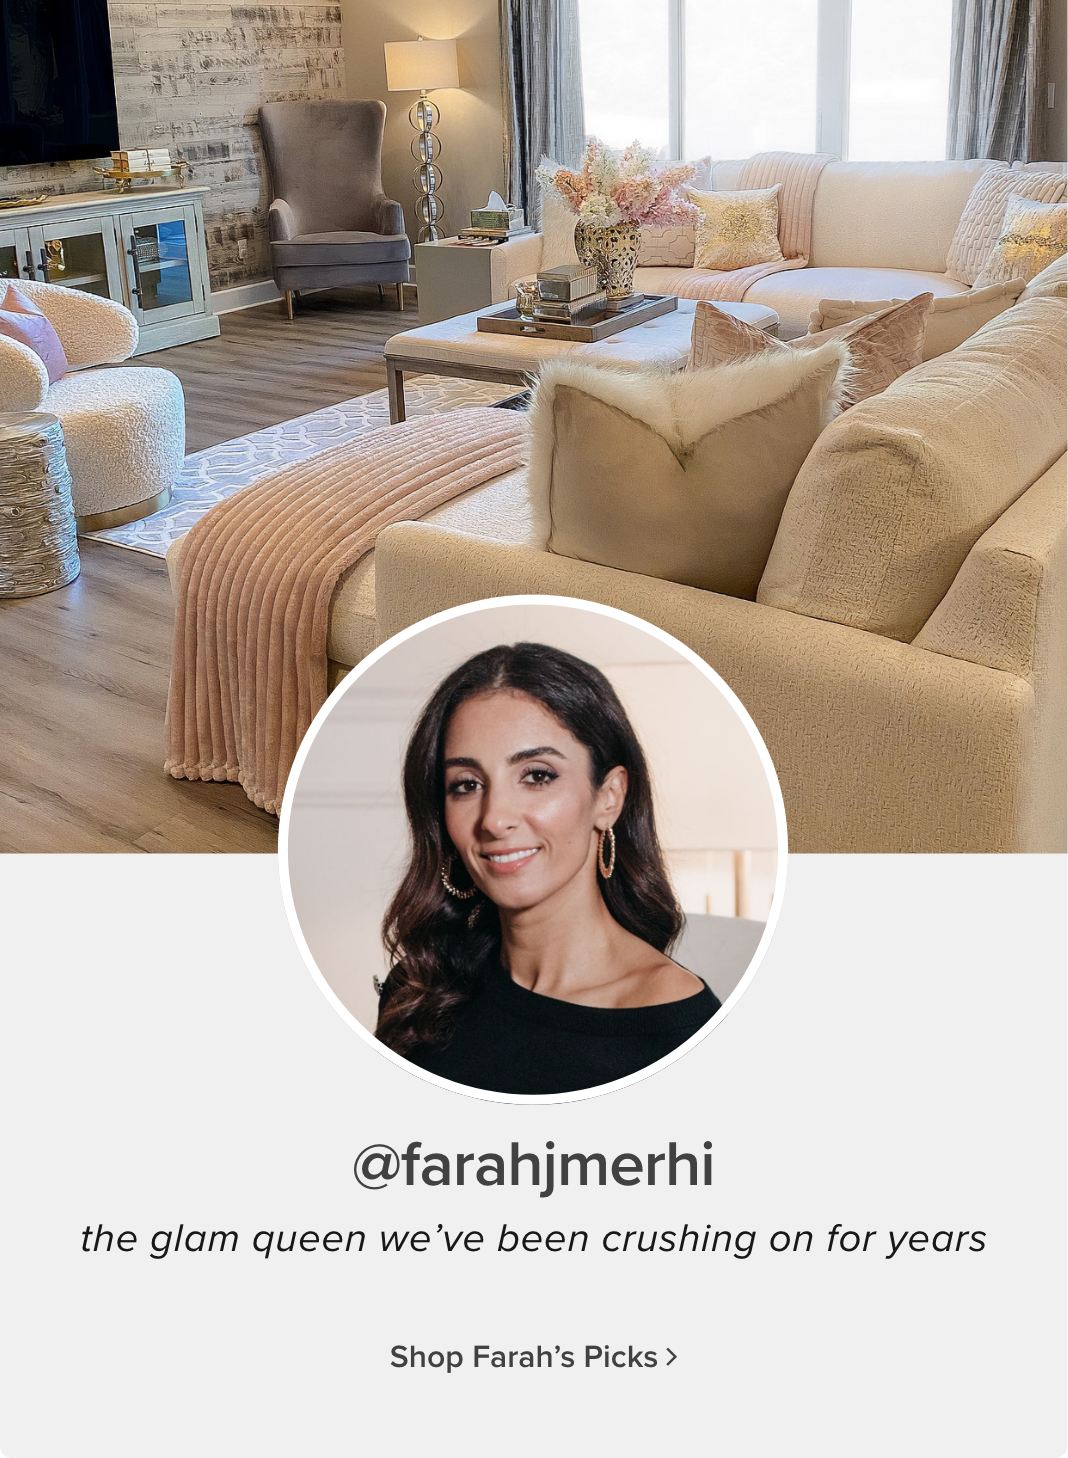 @farahmerhi the glam queen we've been crushing on for years. Shop Farah's Picks>